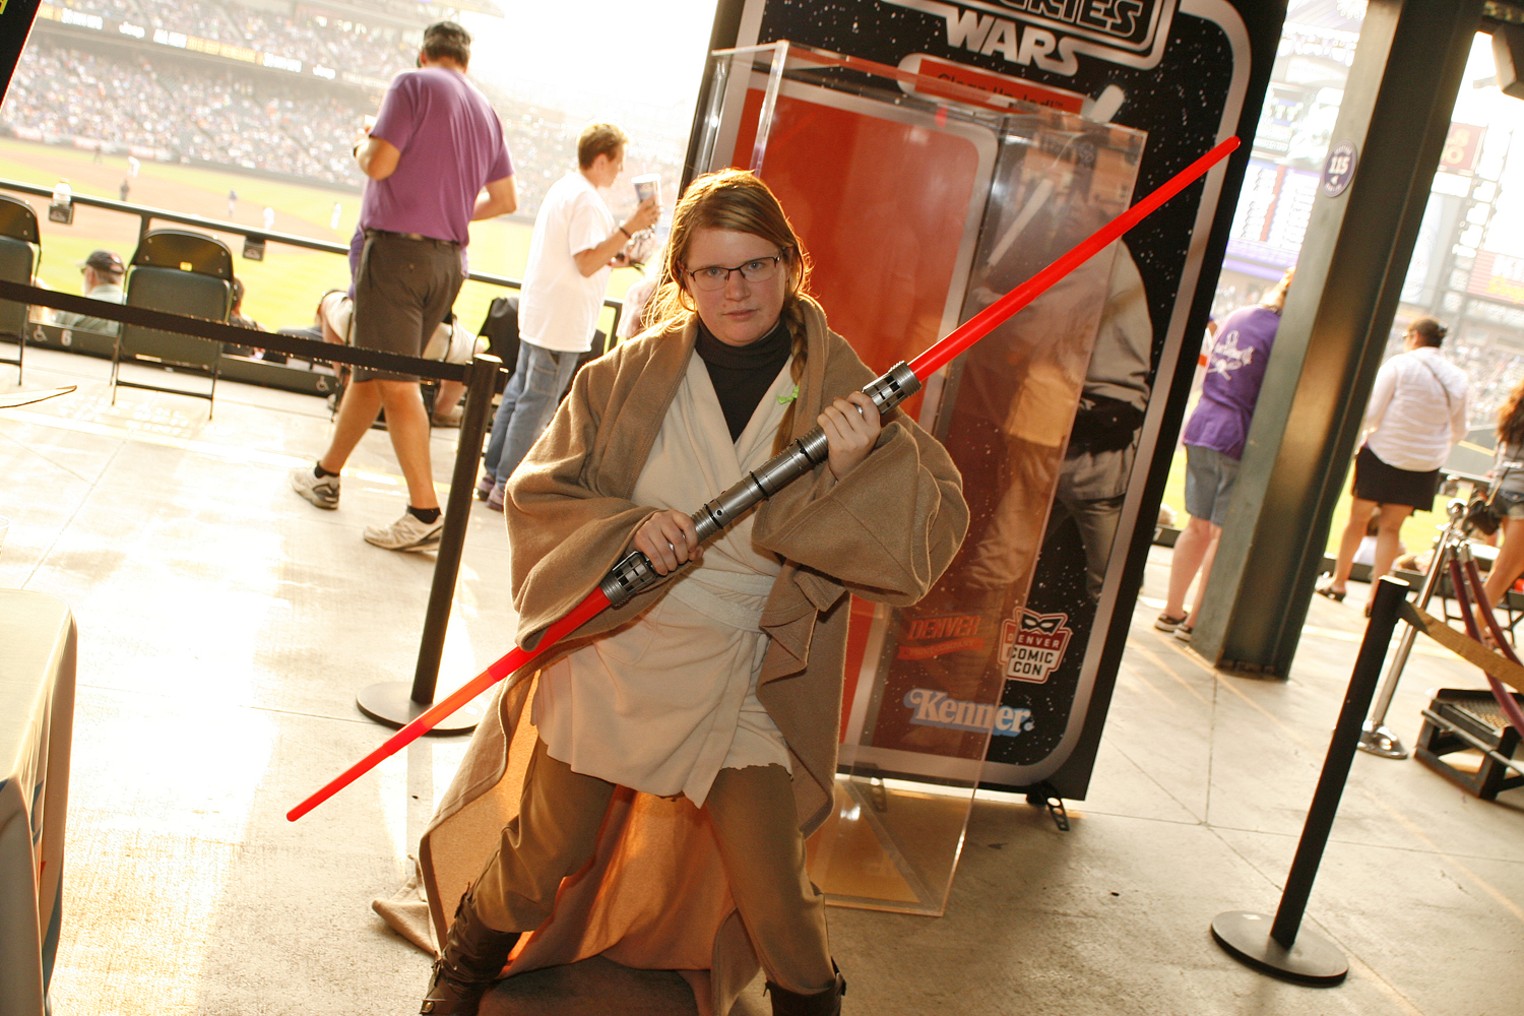 Fans Raise Their Lightsabers for Star Wars Night at Coors Field